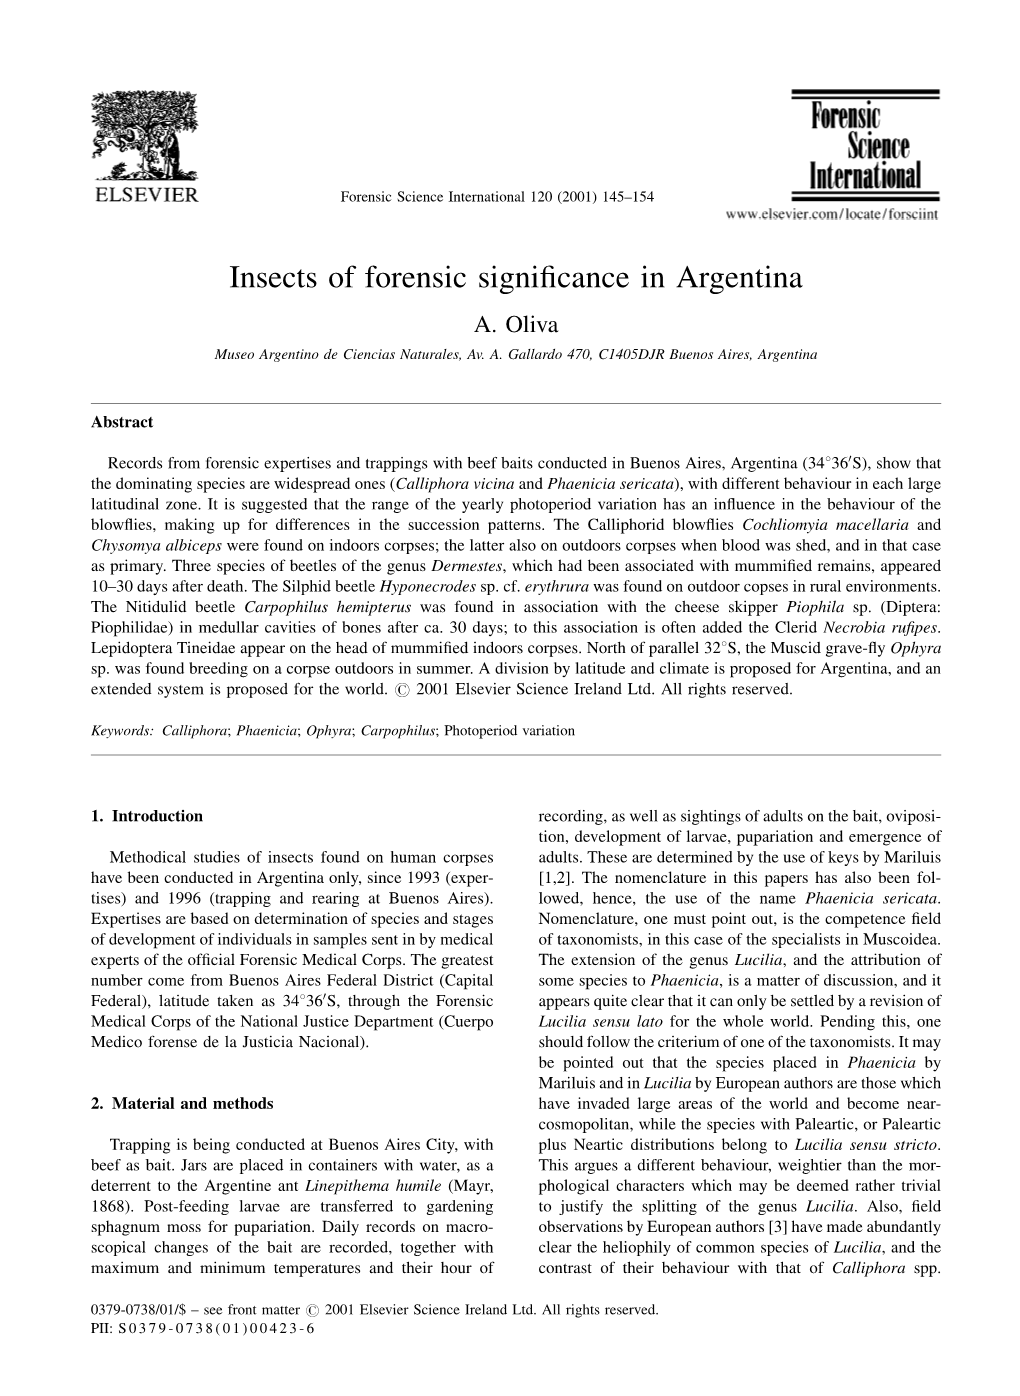 Insects of Forensic Significance in Argentina